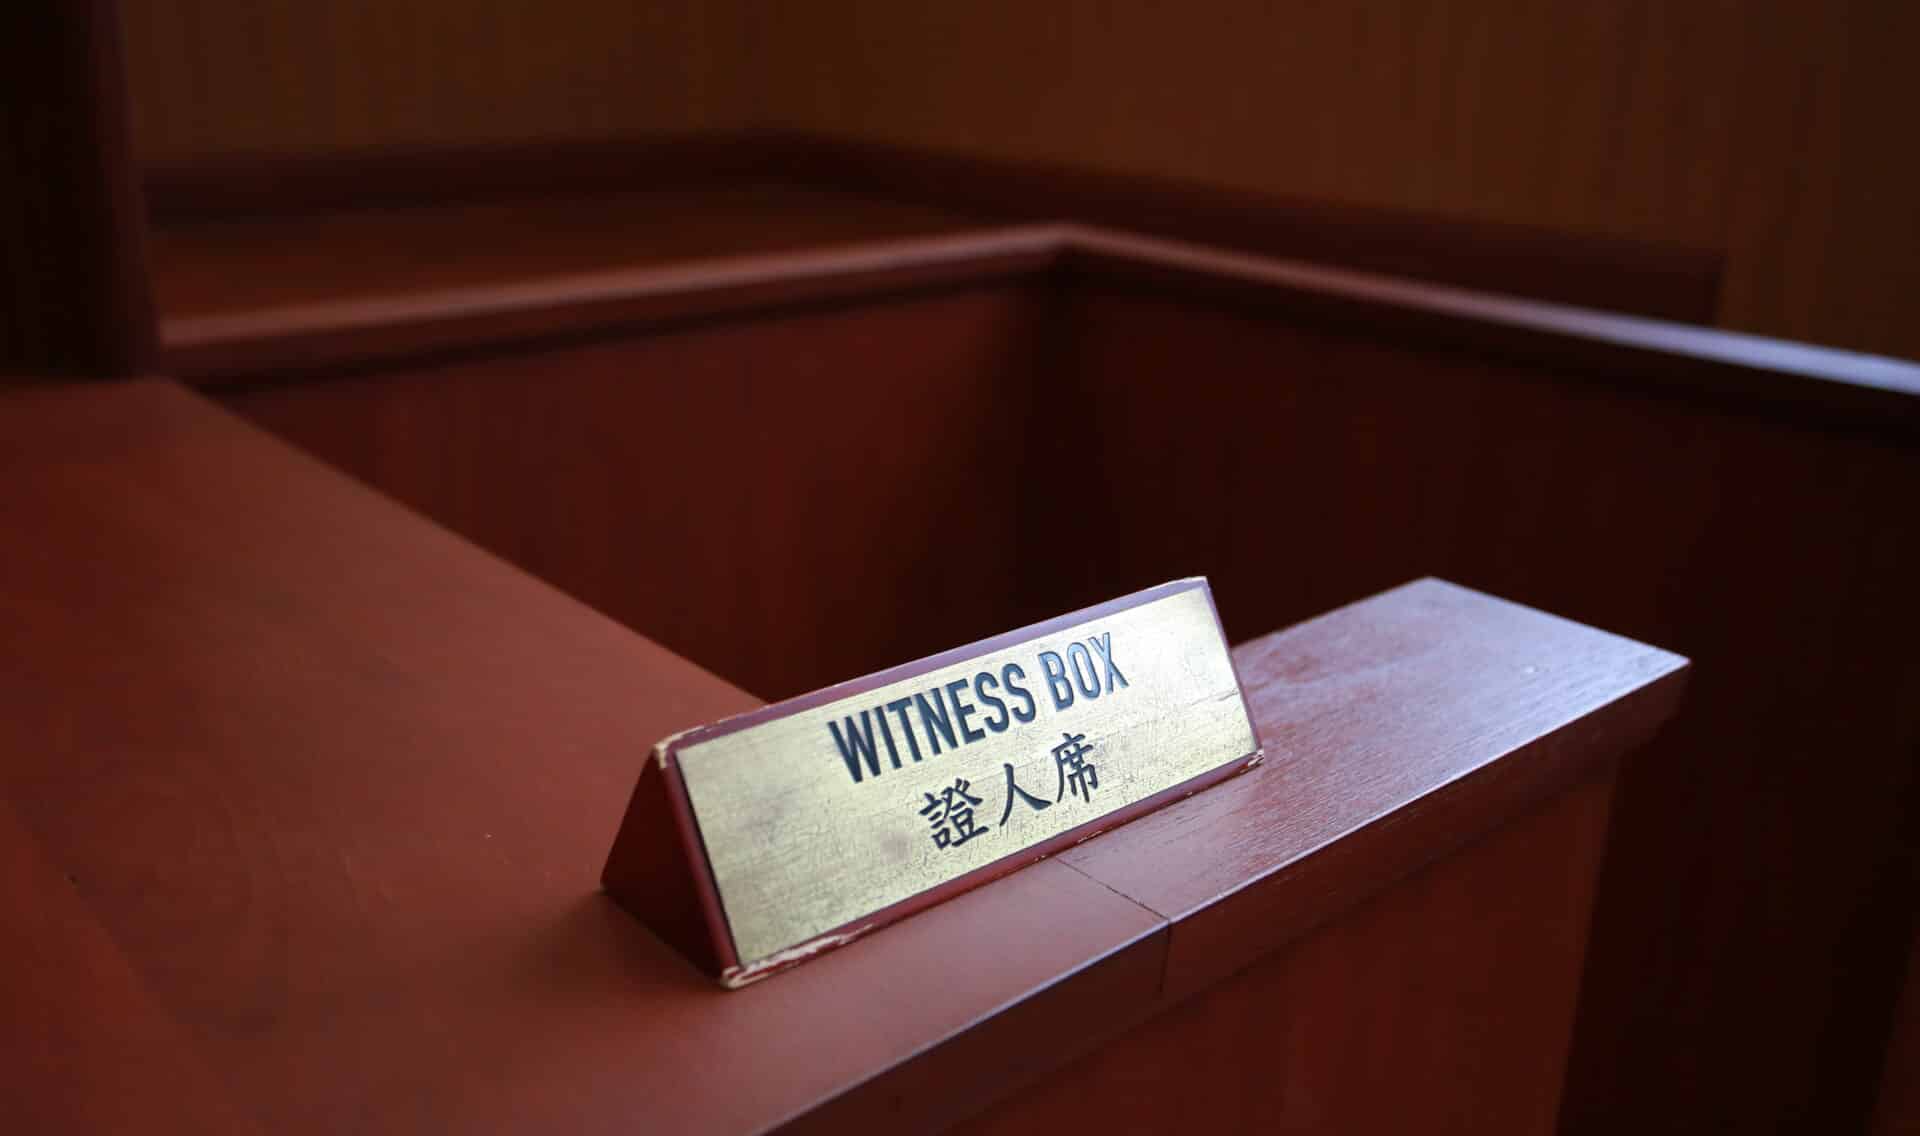 Law Court Background With The Chinese And English Name Witness Box In Hong Kong